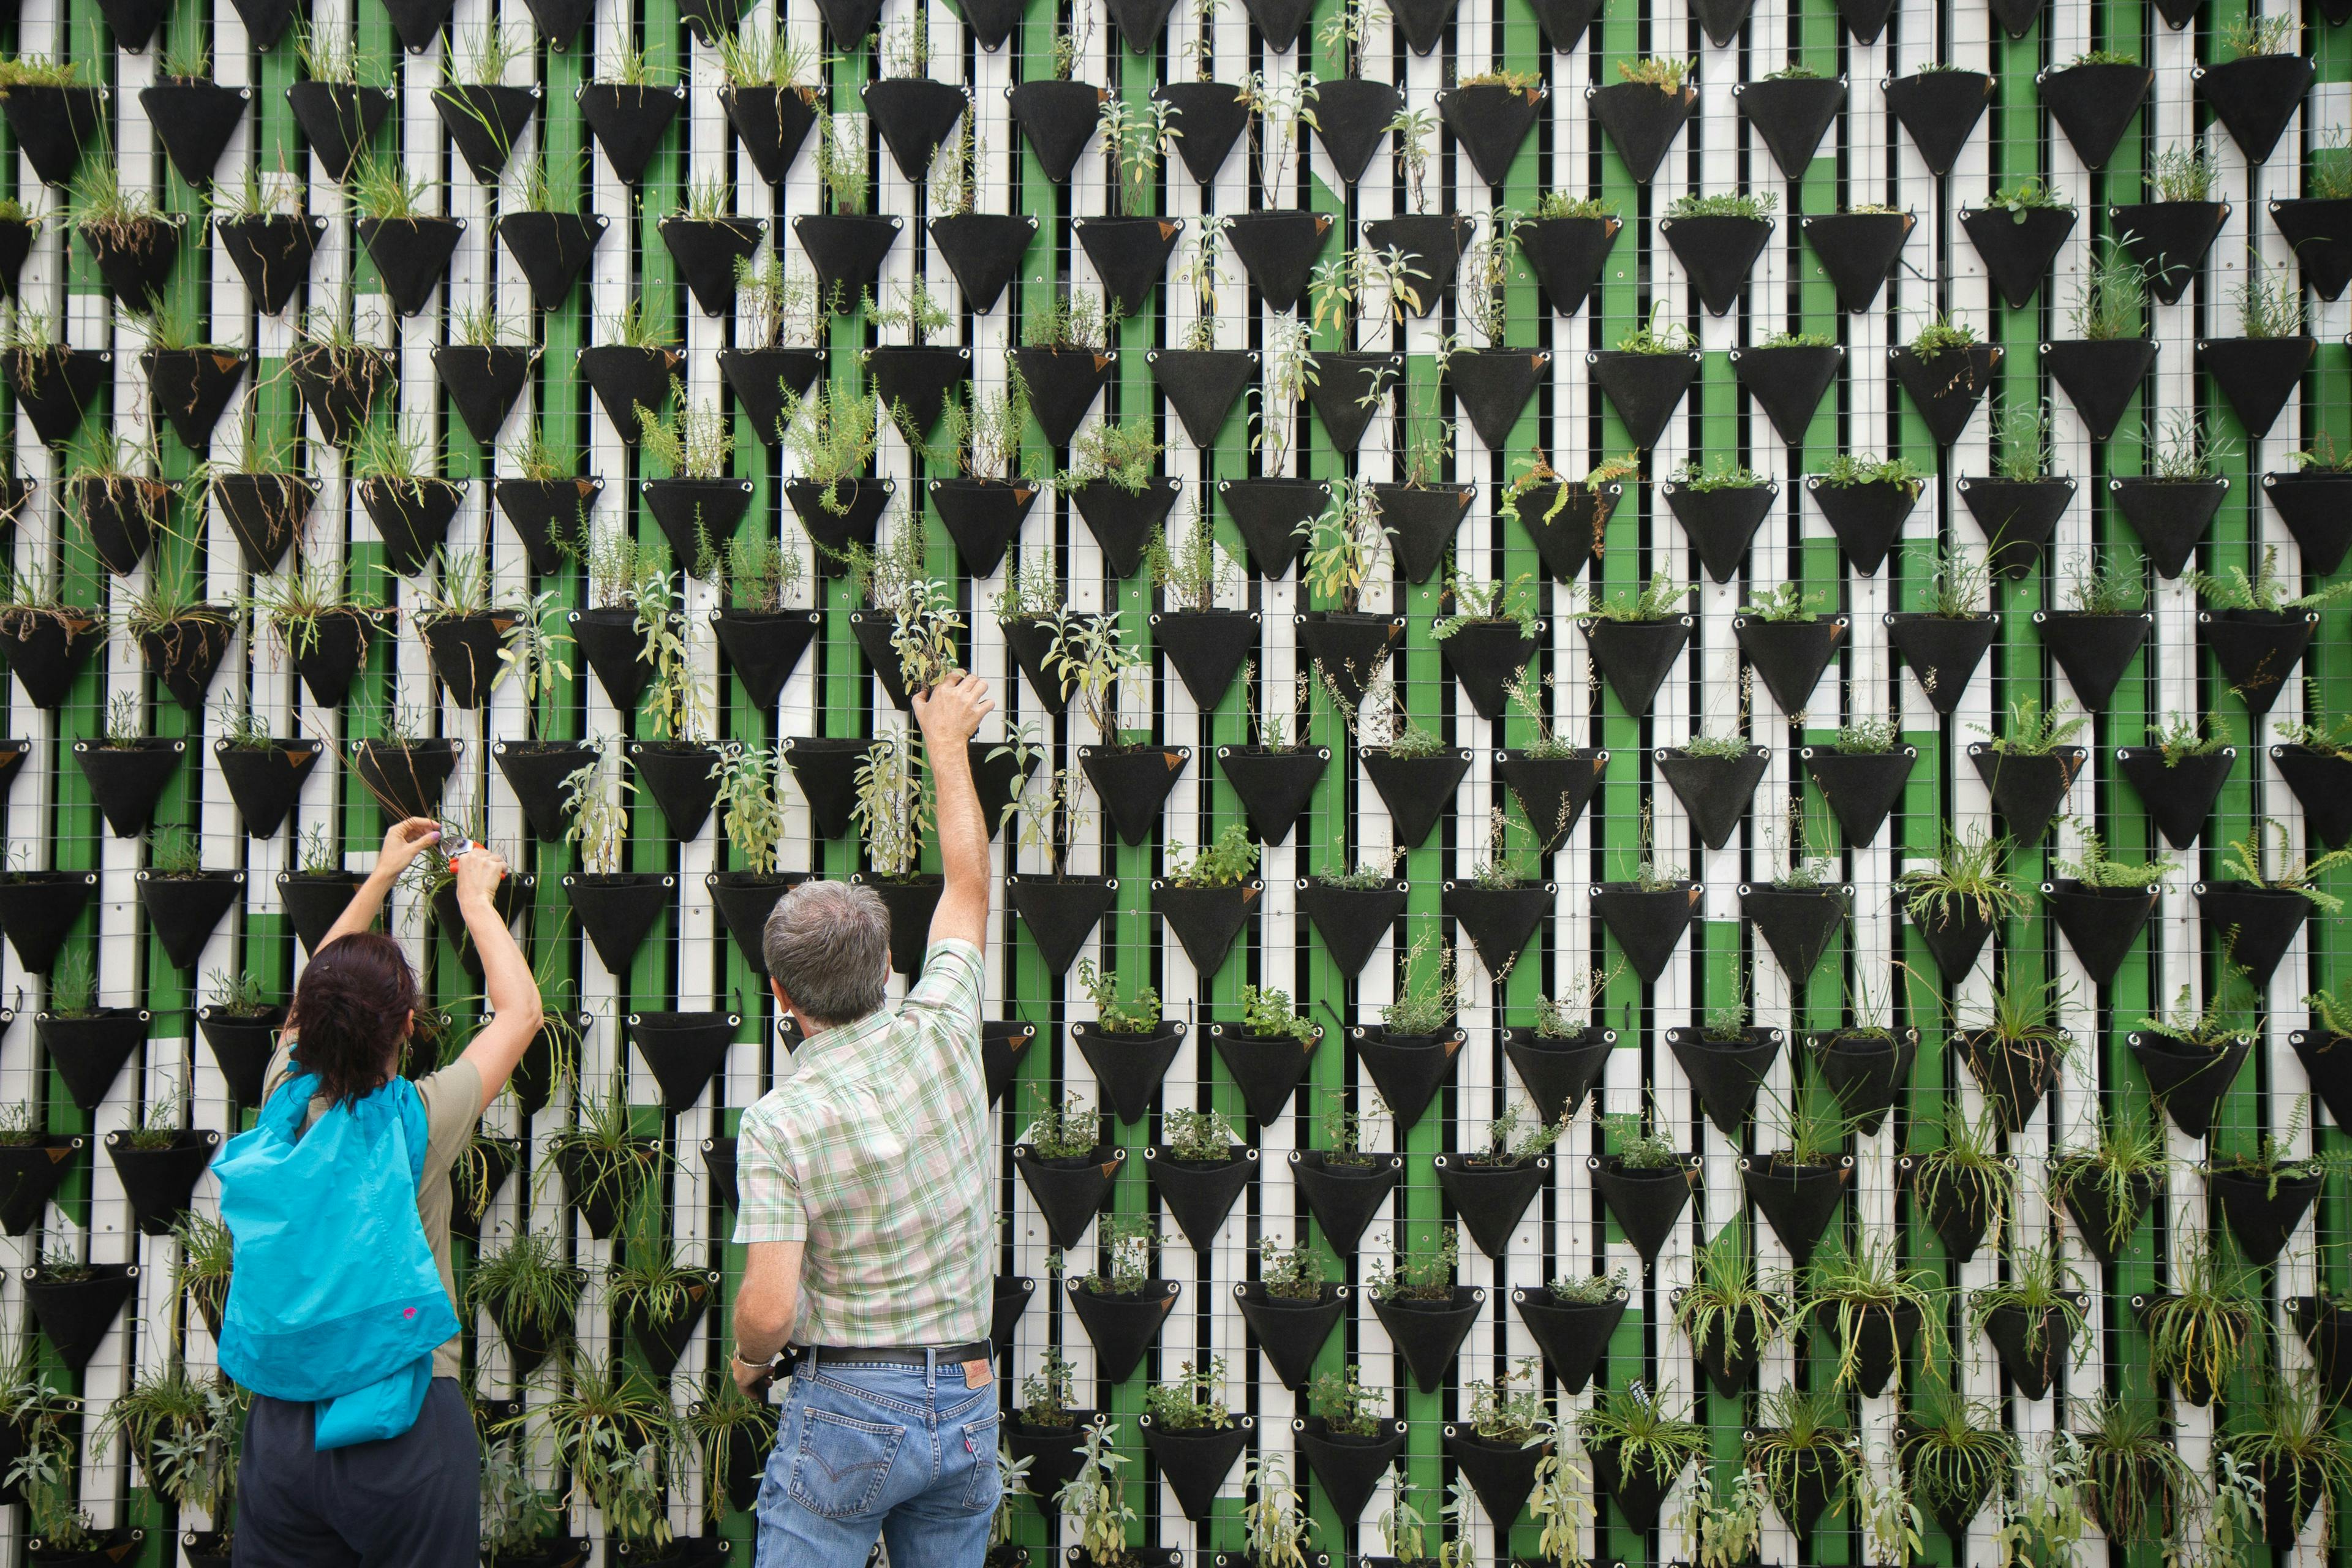 People adding plants to a green wall indicating the need for sustainable and green buildings and infrastructure.